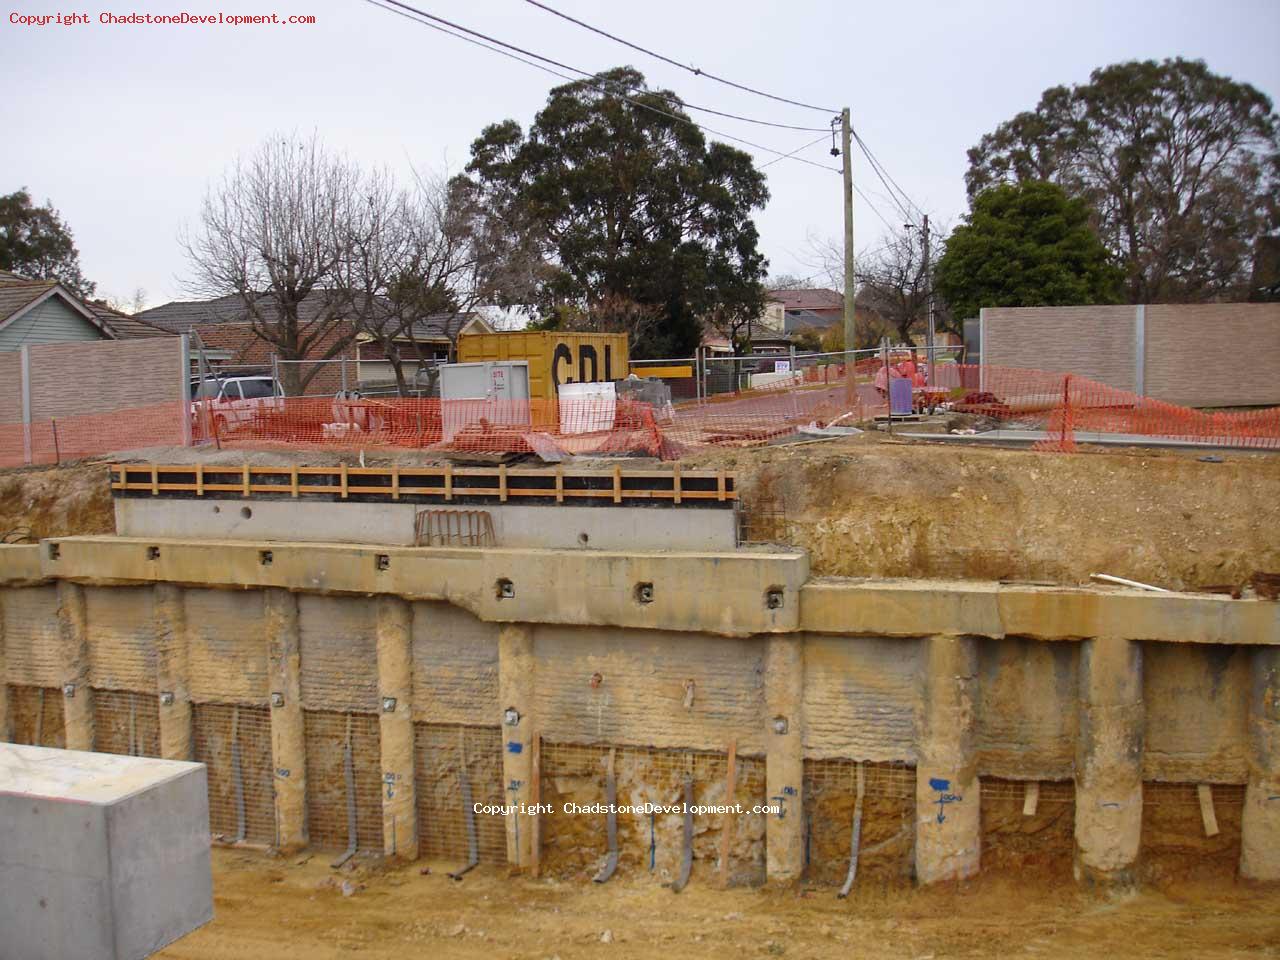 Retaining wall, where the underpass will go - Chadstone Development Discussions